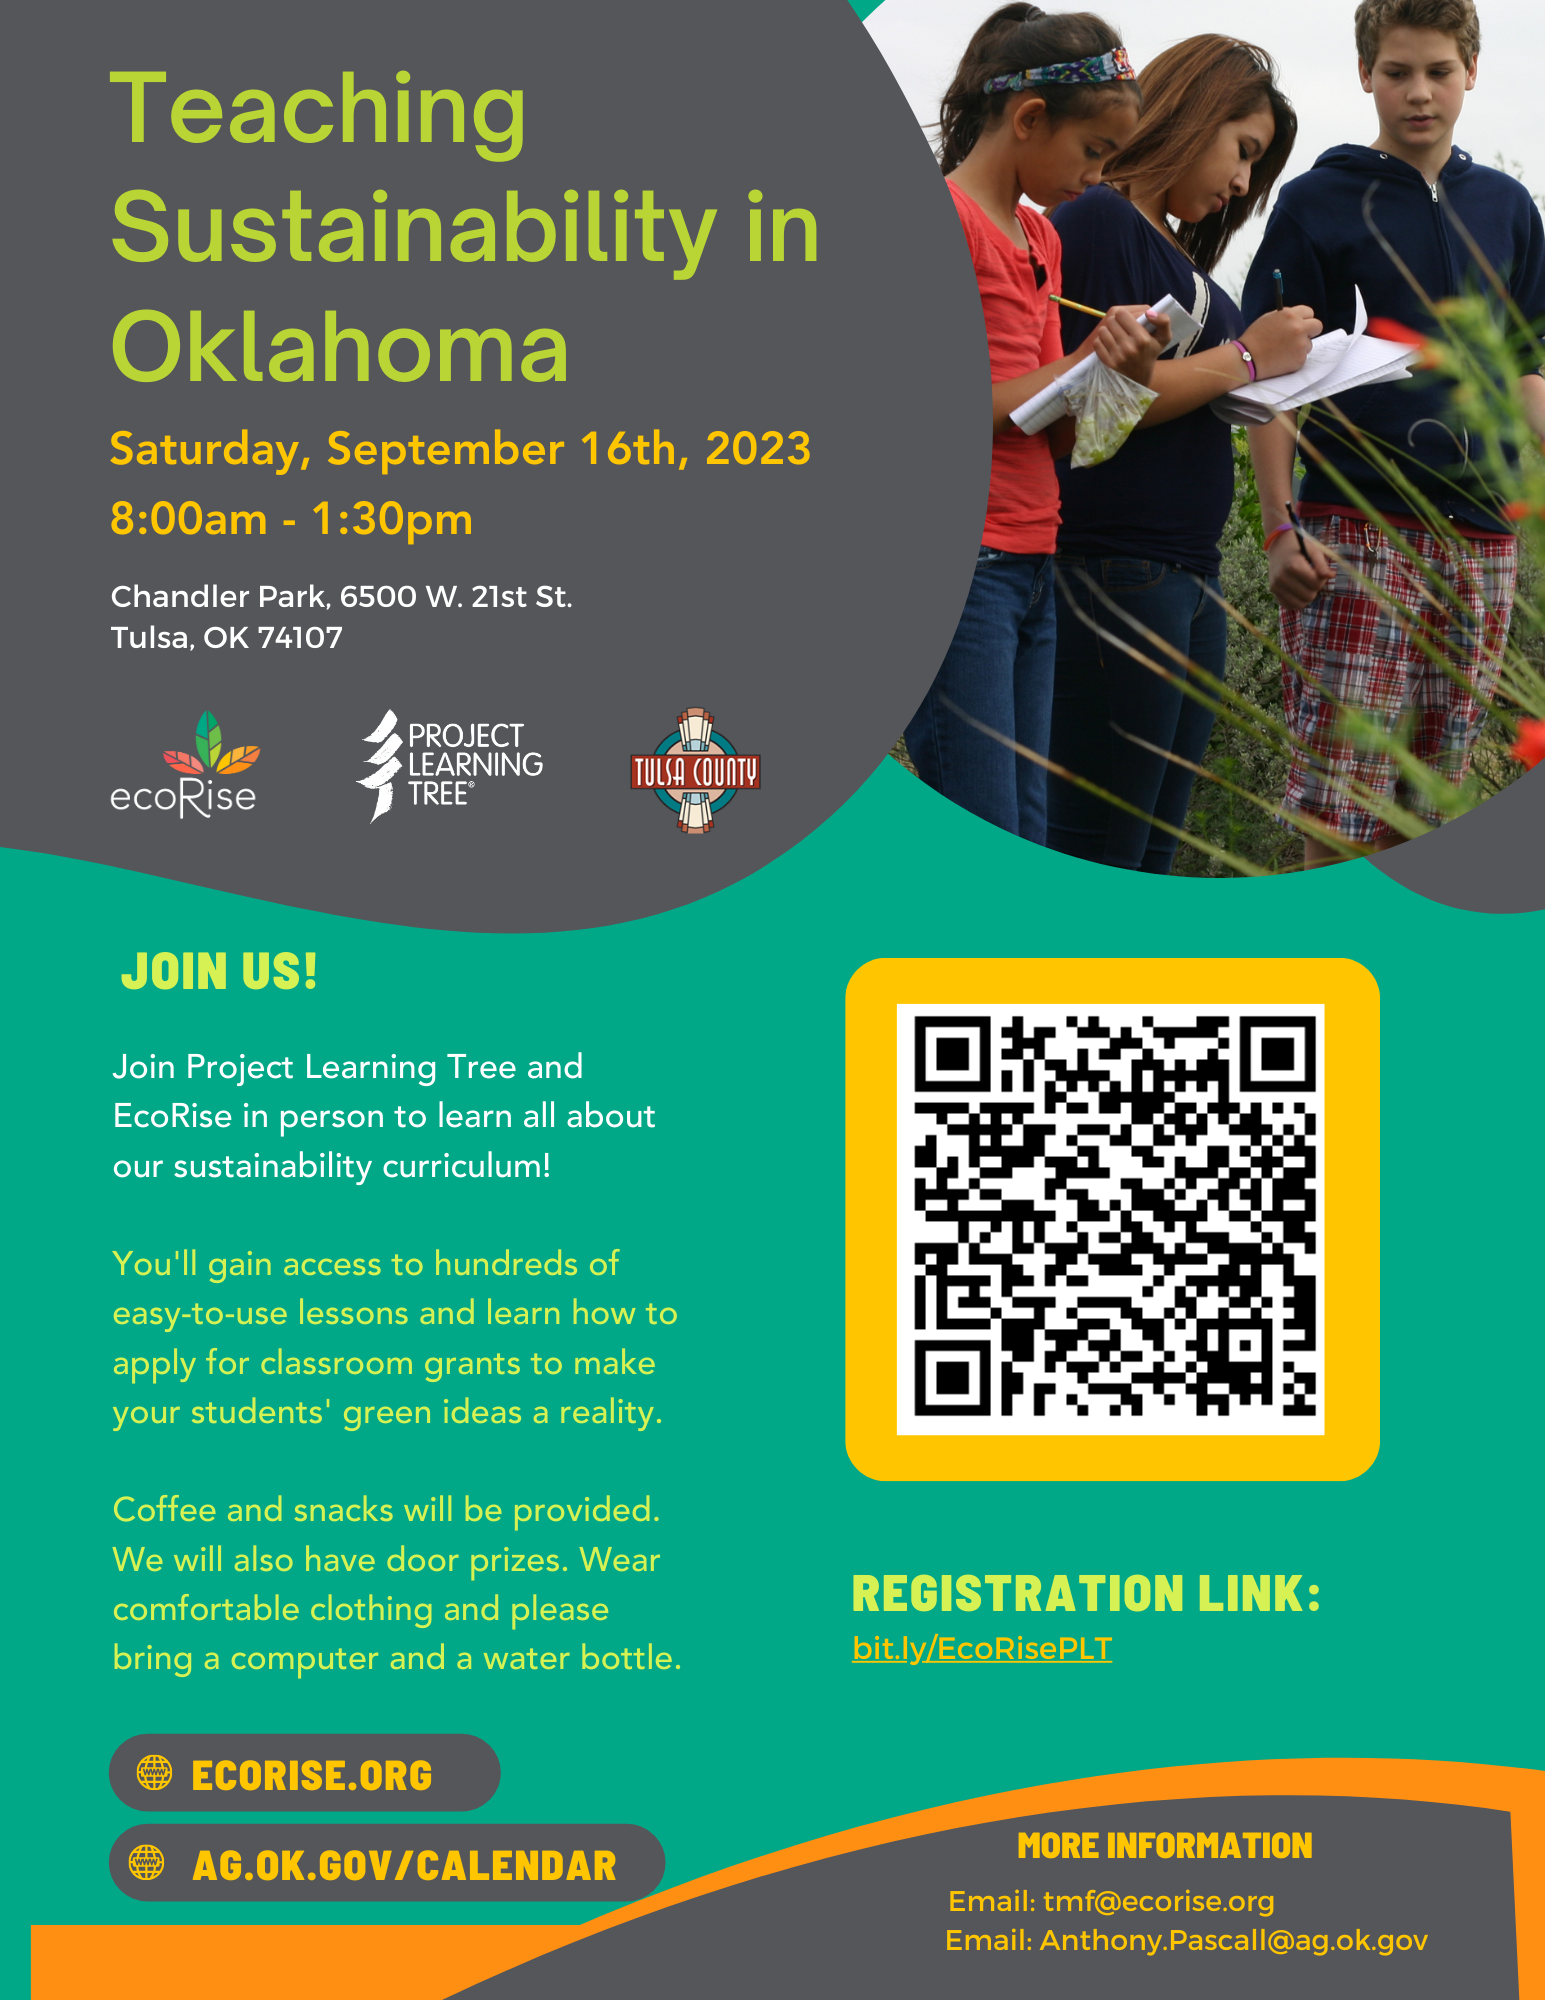 Flyer with information on workshop Titled Teaching Sustainability in Oklahoma